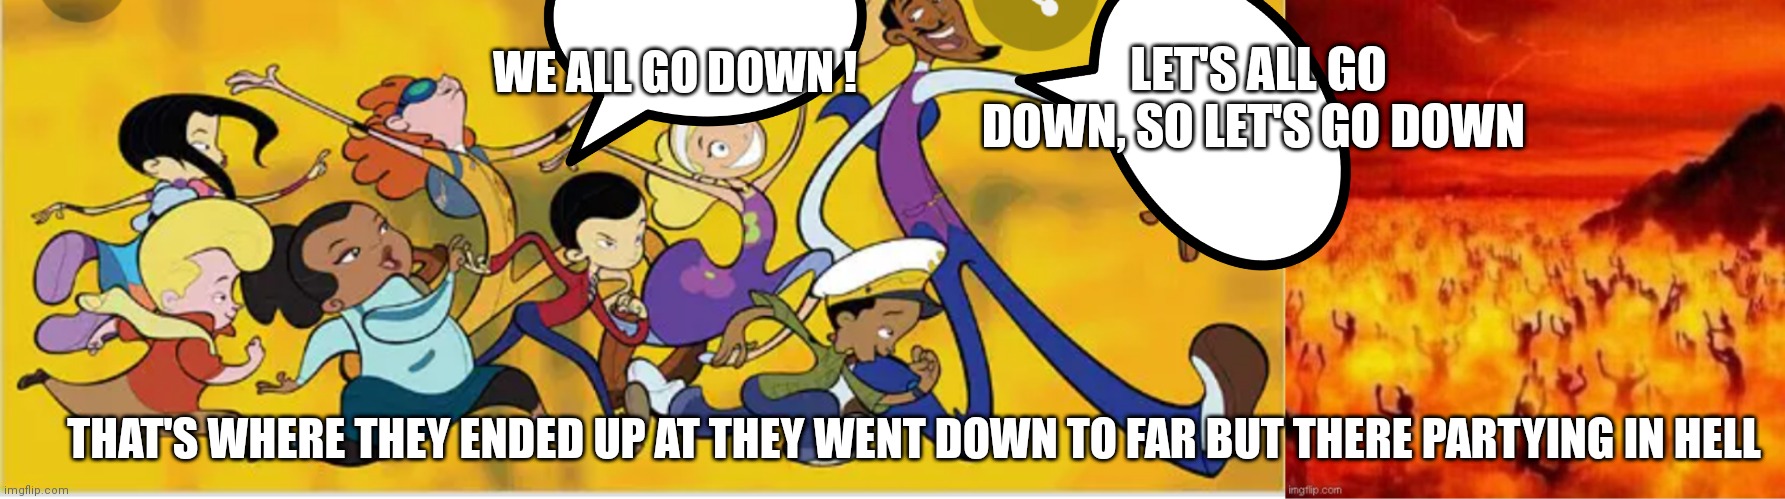 Class of 3000 they literally go down | LET'S ALL GO DOWN, SO LET'S GO DOWN; WE ALL GO DOWN ! THAT'S WHERE THEY ENDED UP AT THEY WENT DOWN TO FAR BUT THERE PARTYING IN HELL | image tagged in funny memes | made w/ Imgflip meme maker